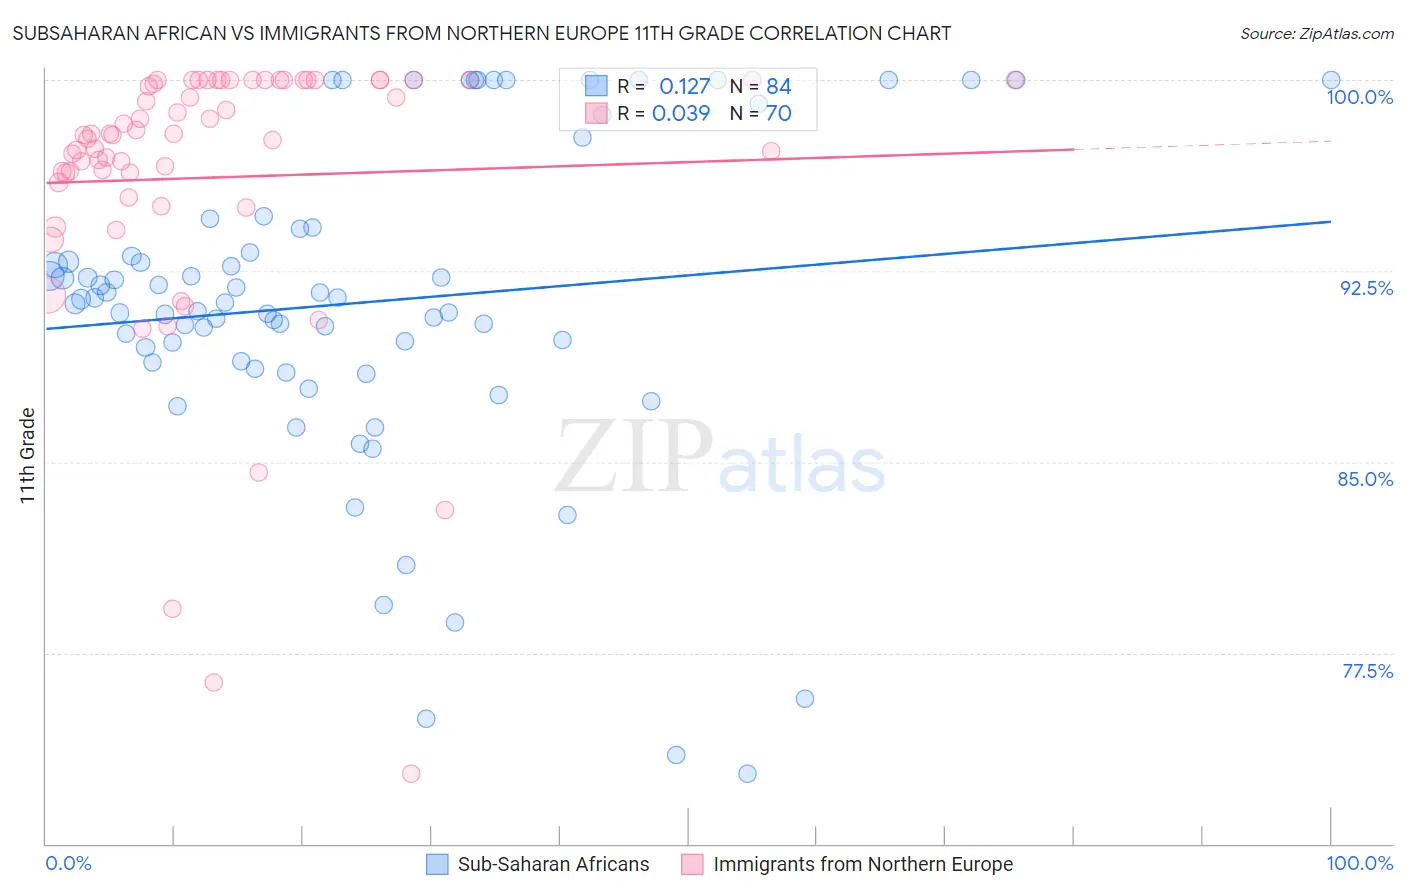 Subsaharan African vs Immigrants from Northern Europe 11th Grade